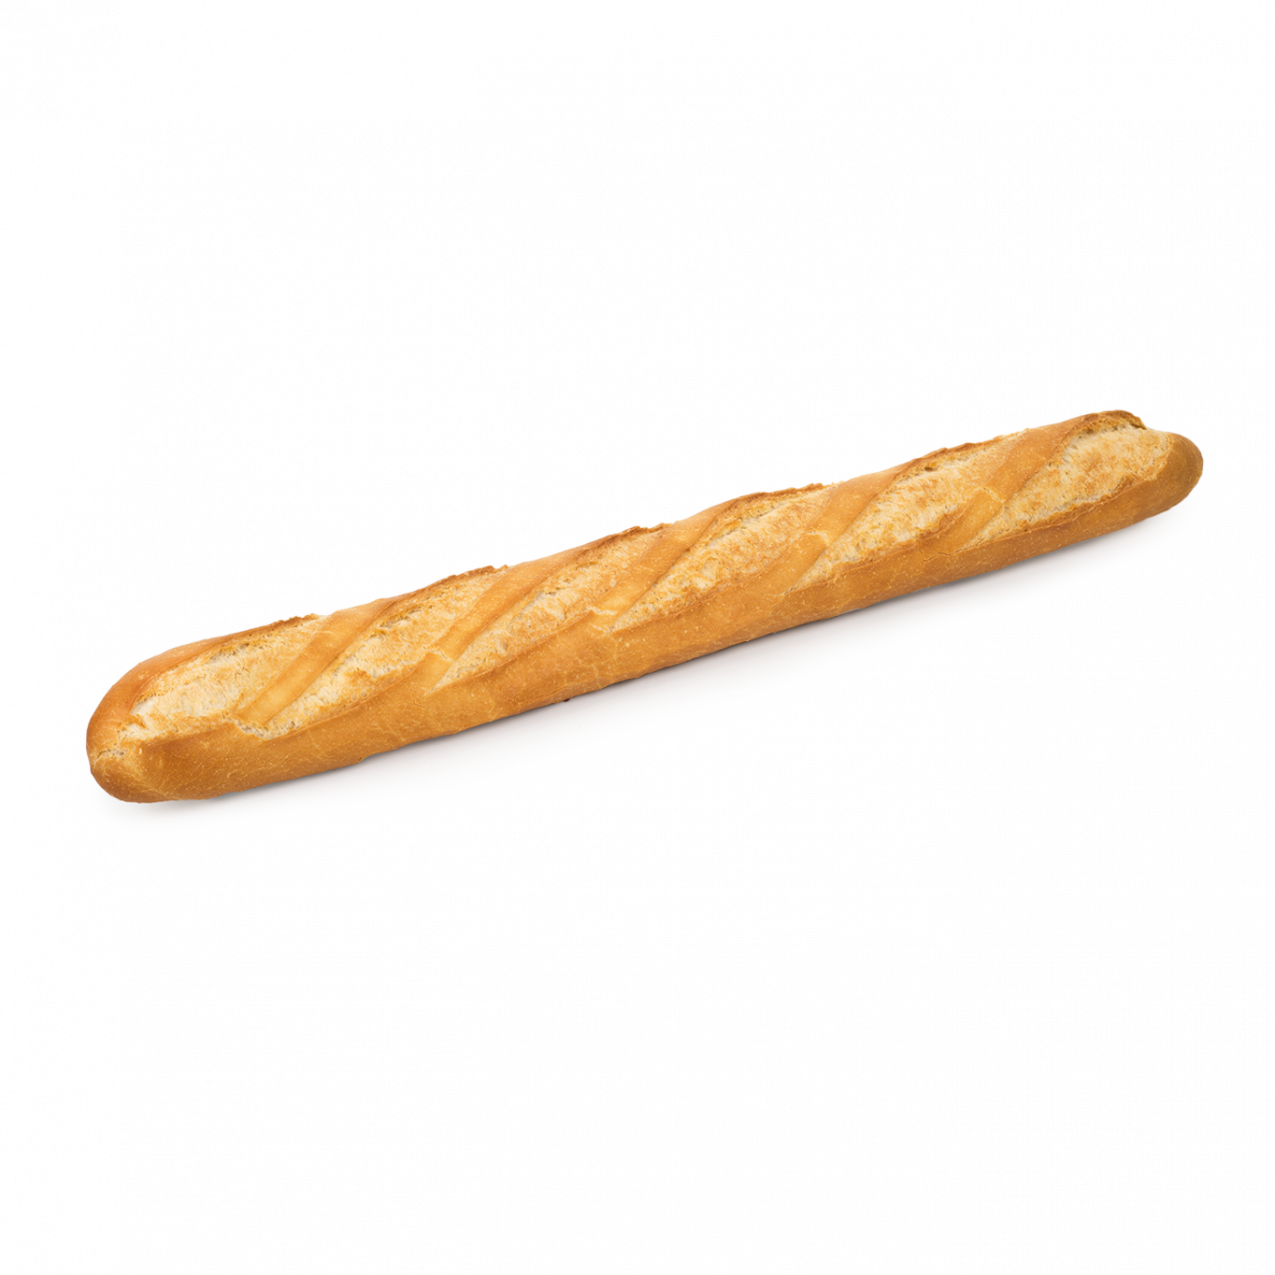 Classic Baguette 250g - Pre-baked bread and frozen pastries